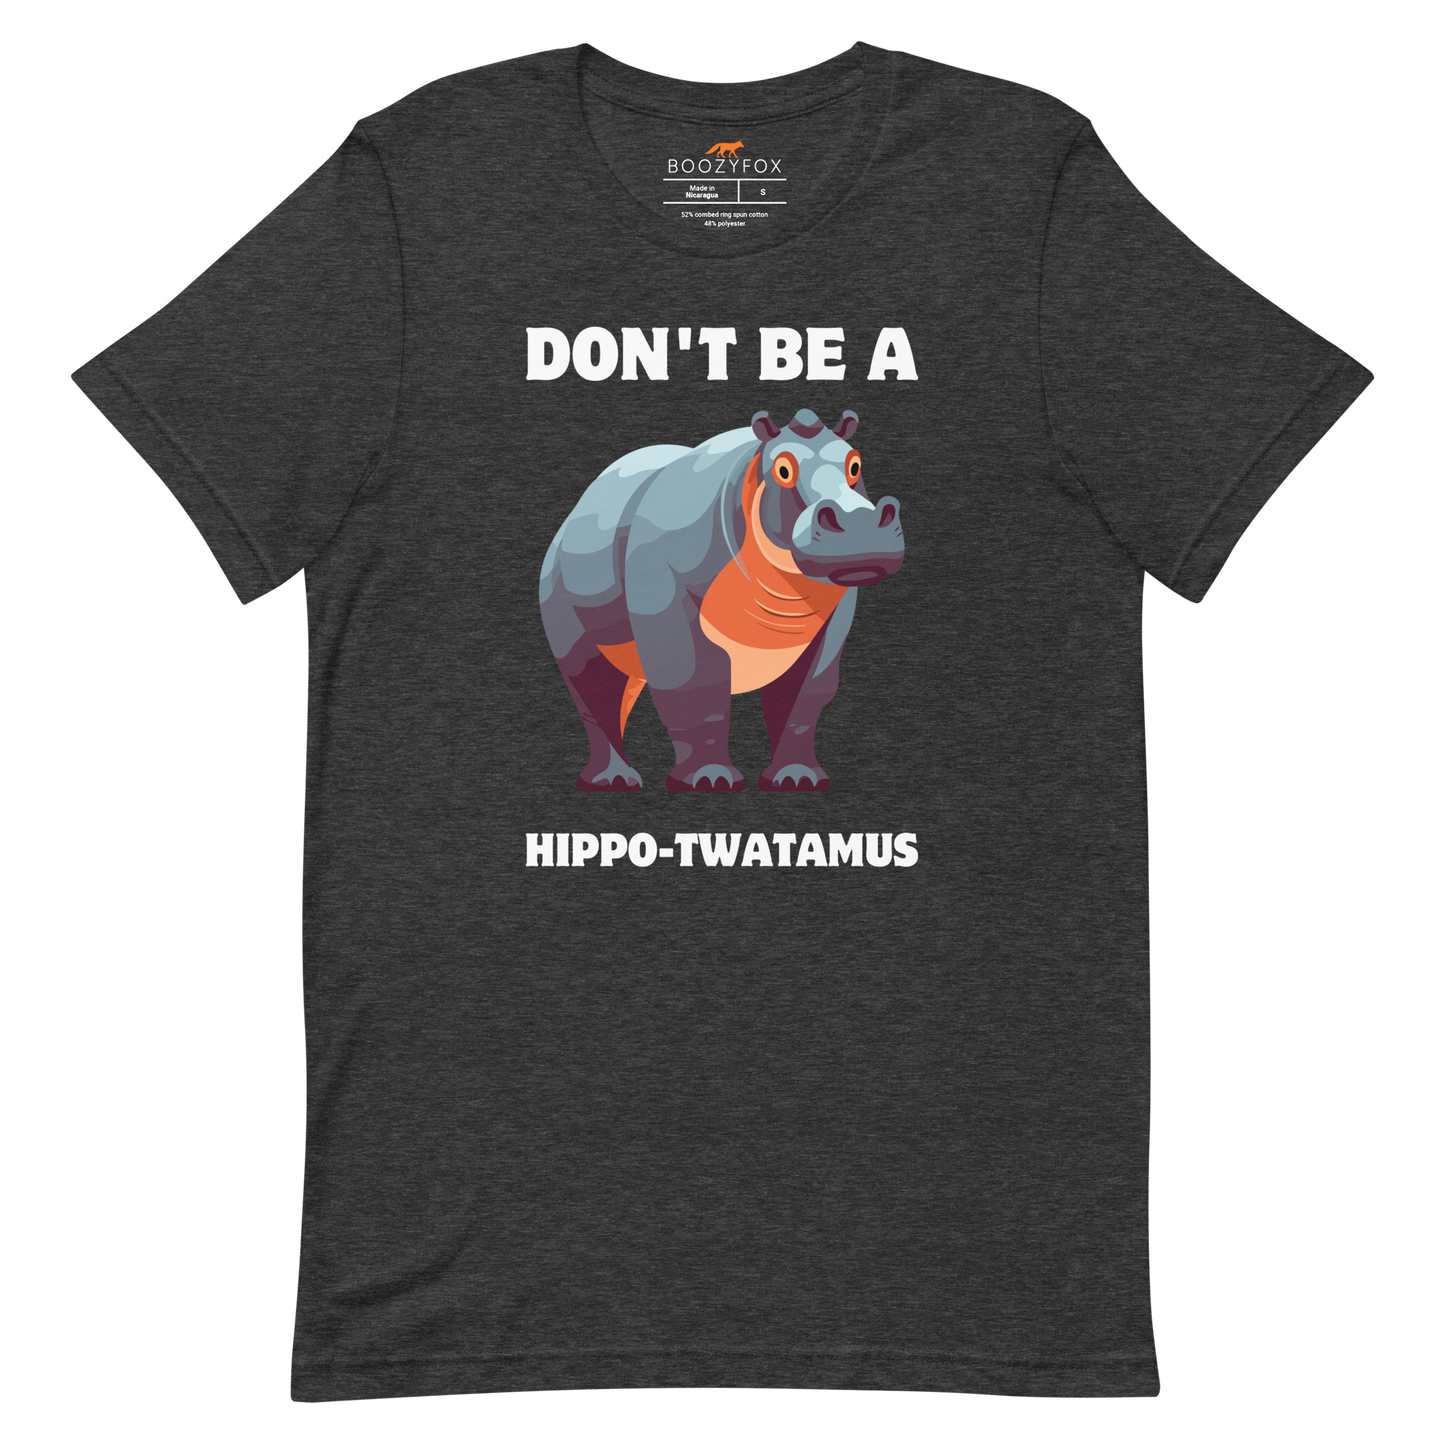 Dark Grey Heather Premium Hippo Tee featuring a Don't Be a Hippo-Twatamus graphic on the chest - Funny Graphic Hippo Tees - Boozy Fox